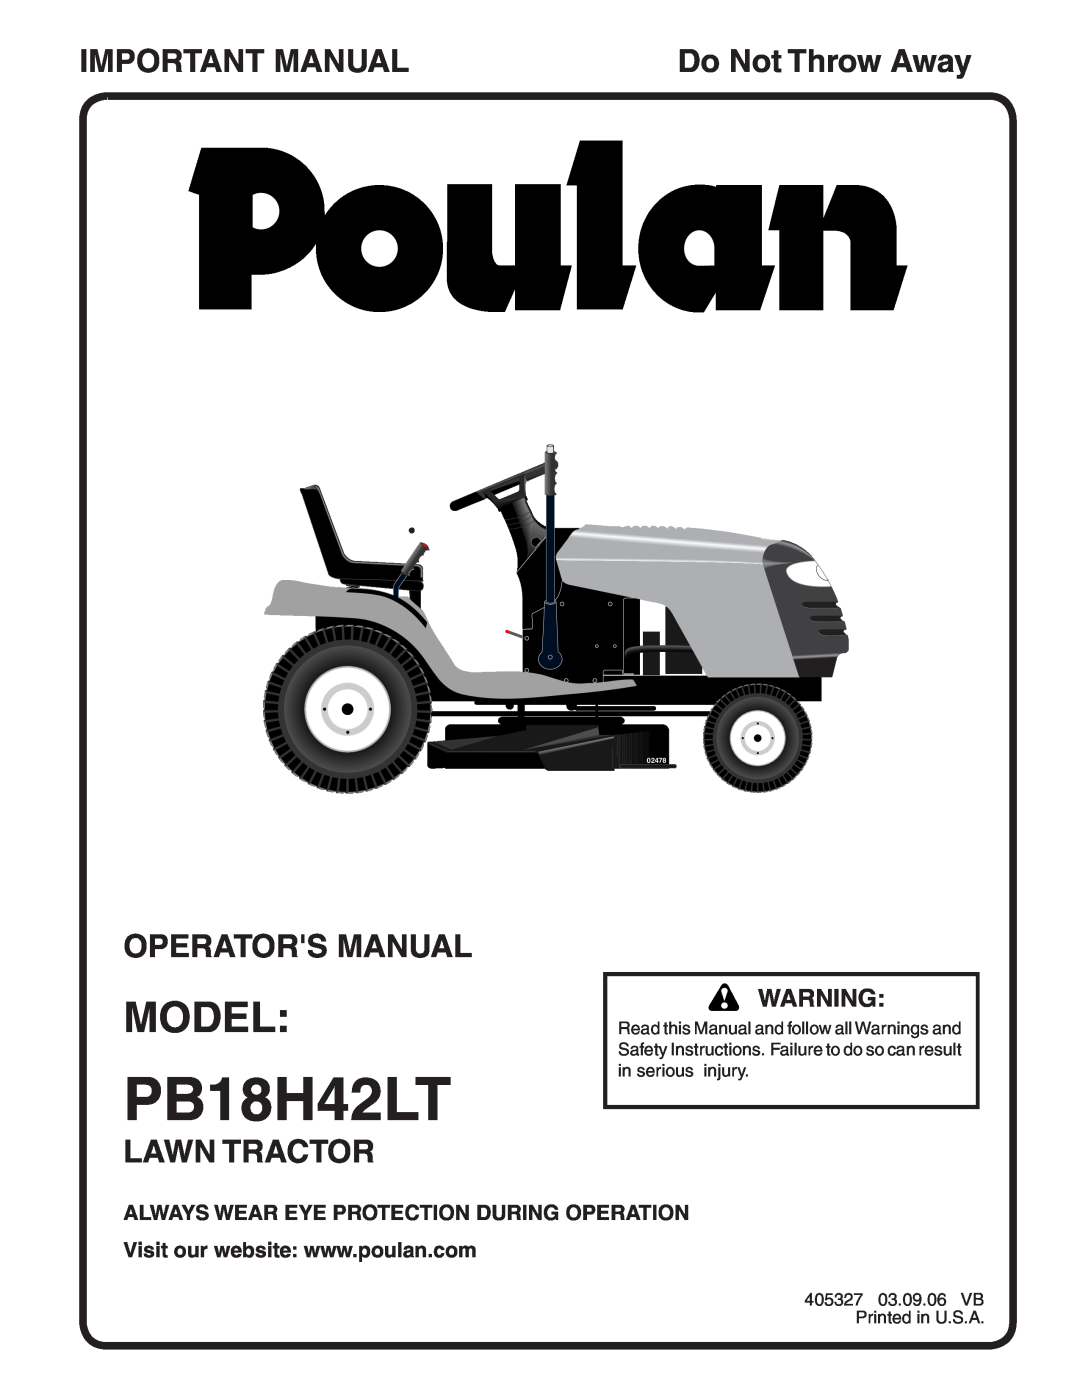 Poulan 405327 manual Model, Important Manual, Operators Manual, Lawn Tractor, Always Wear Eye Protection During Operation 